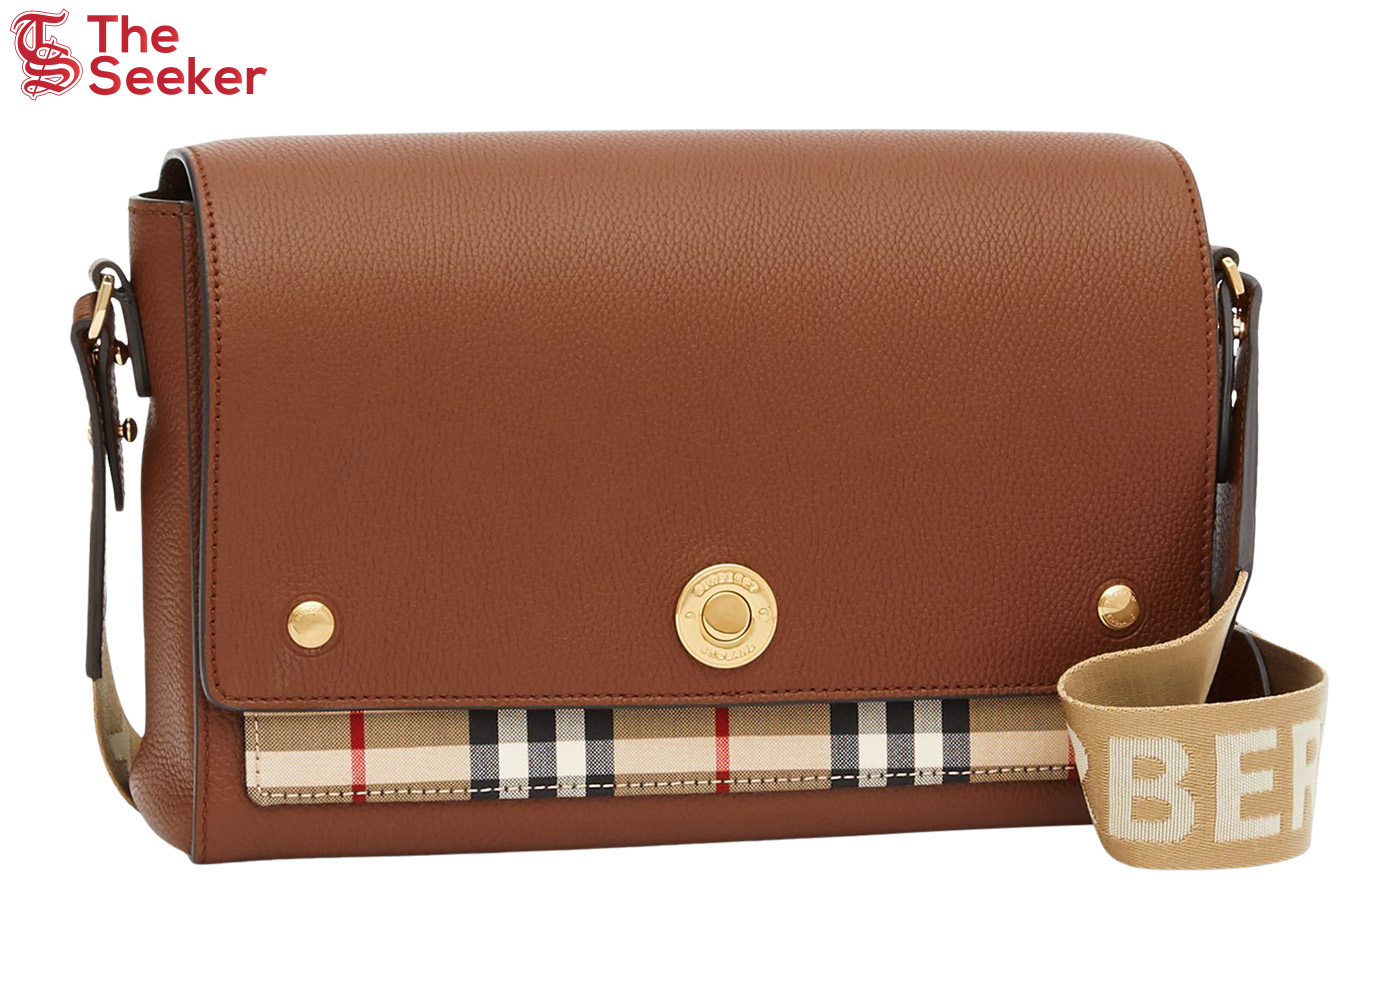 Burberry Vintage Check and Leather Note Crossbody Bag Tan